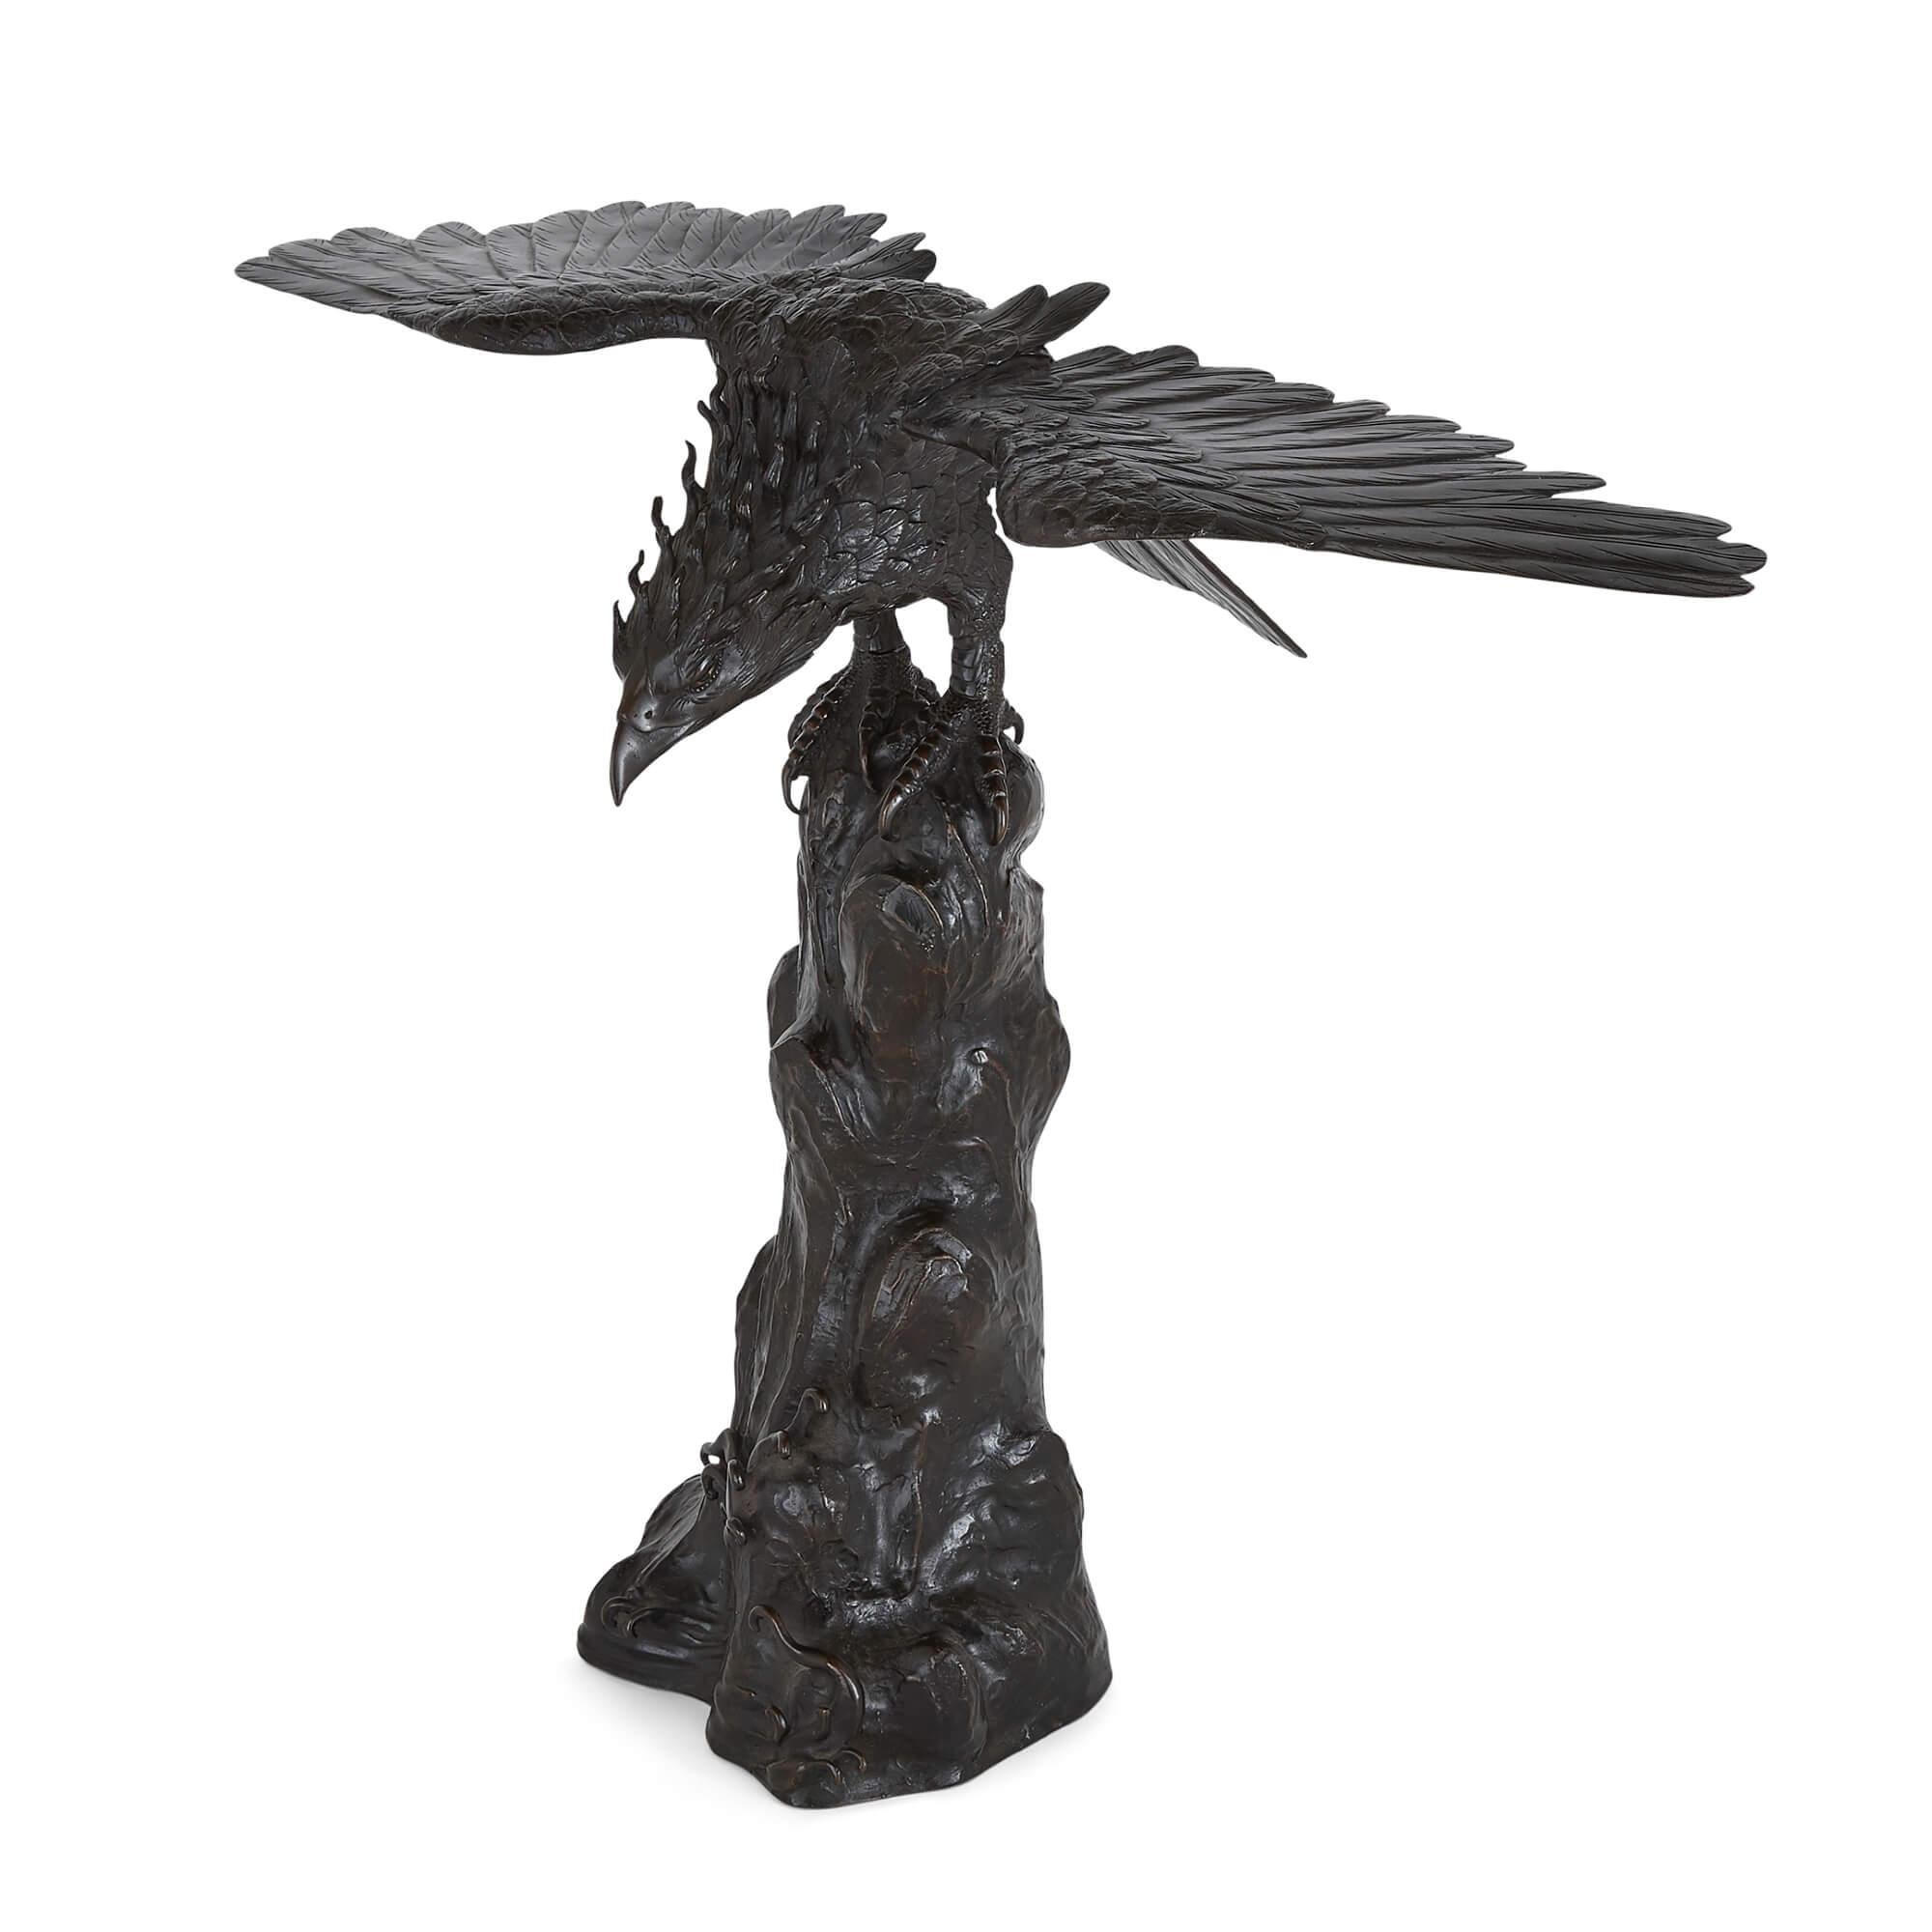 Antique Japanese patinated bronze eagle
Japanese, c. 1900
Height 54cm, width 67cm, depth 32cm

This fine and naturalistic Meiji period bronze model is cast into the form of an eagle, who grips into his stump-like perch with long claws as his wings